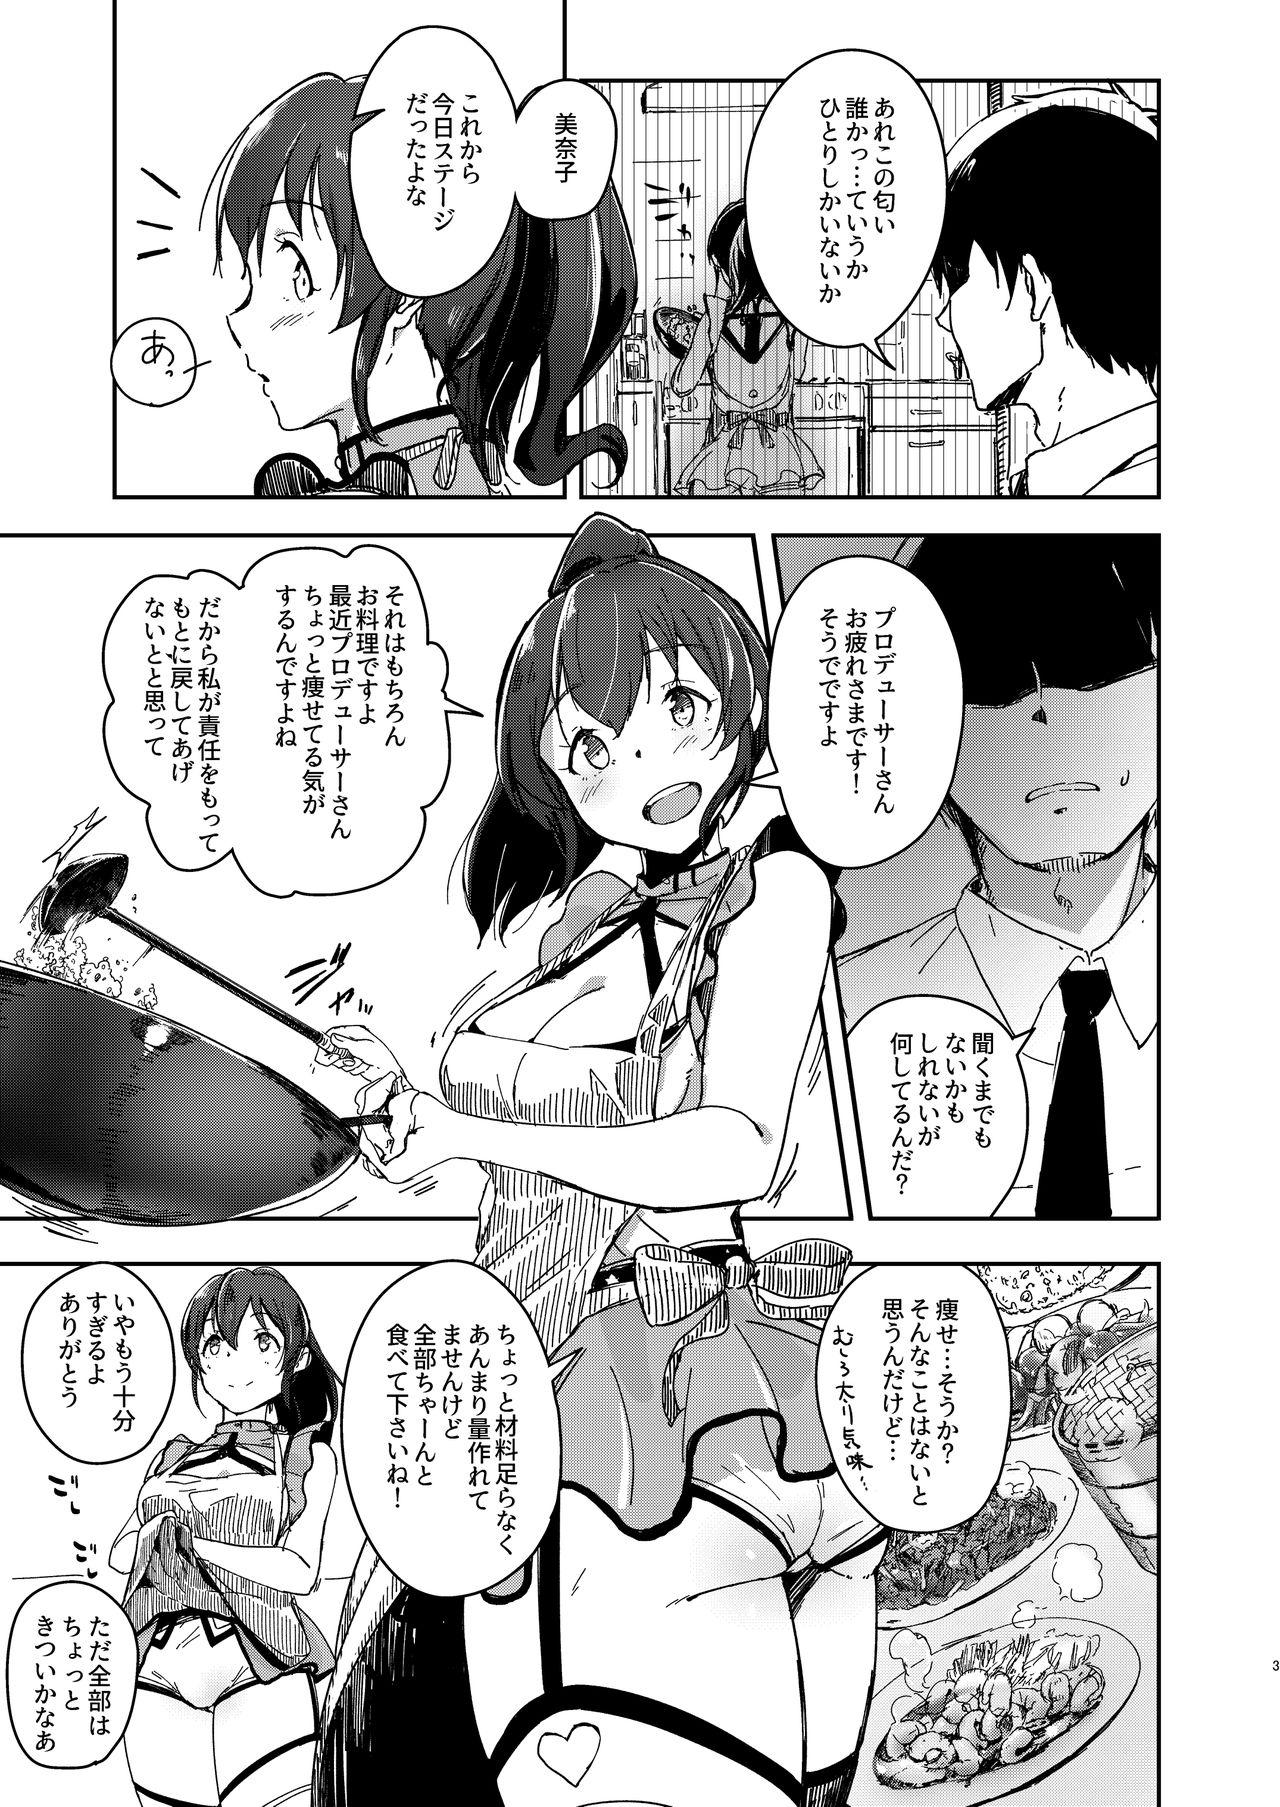 Gaygroupsex TOP! CLOVER BOOK + omake - The idolmaster Gemidos - Page 2